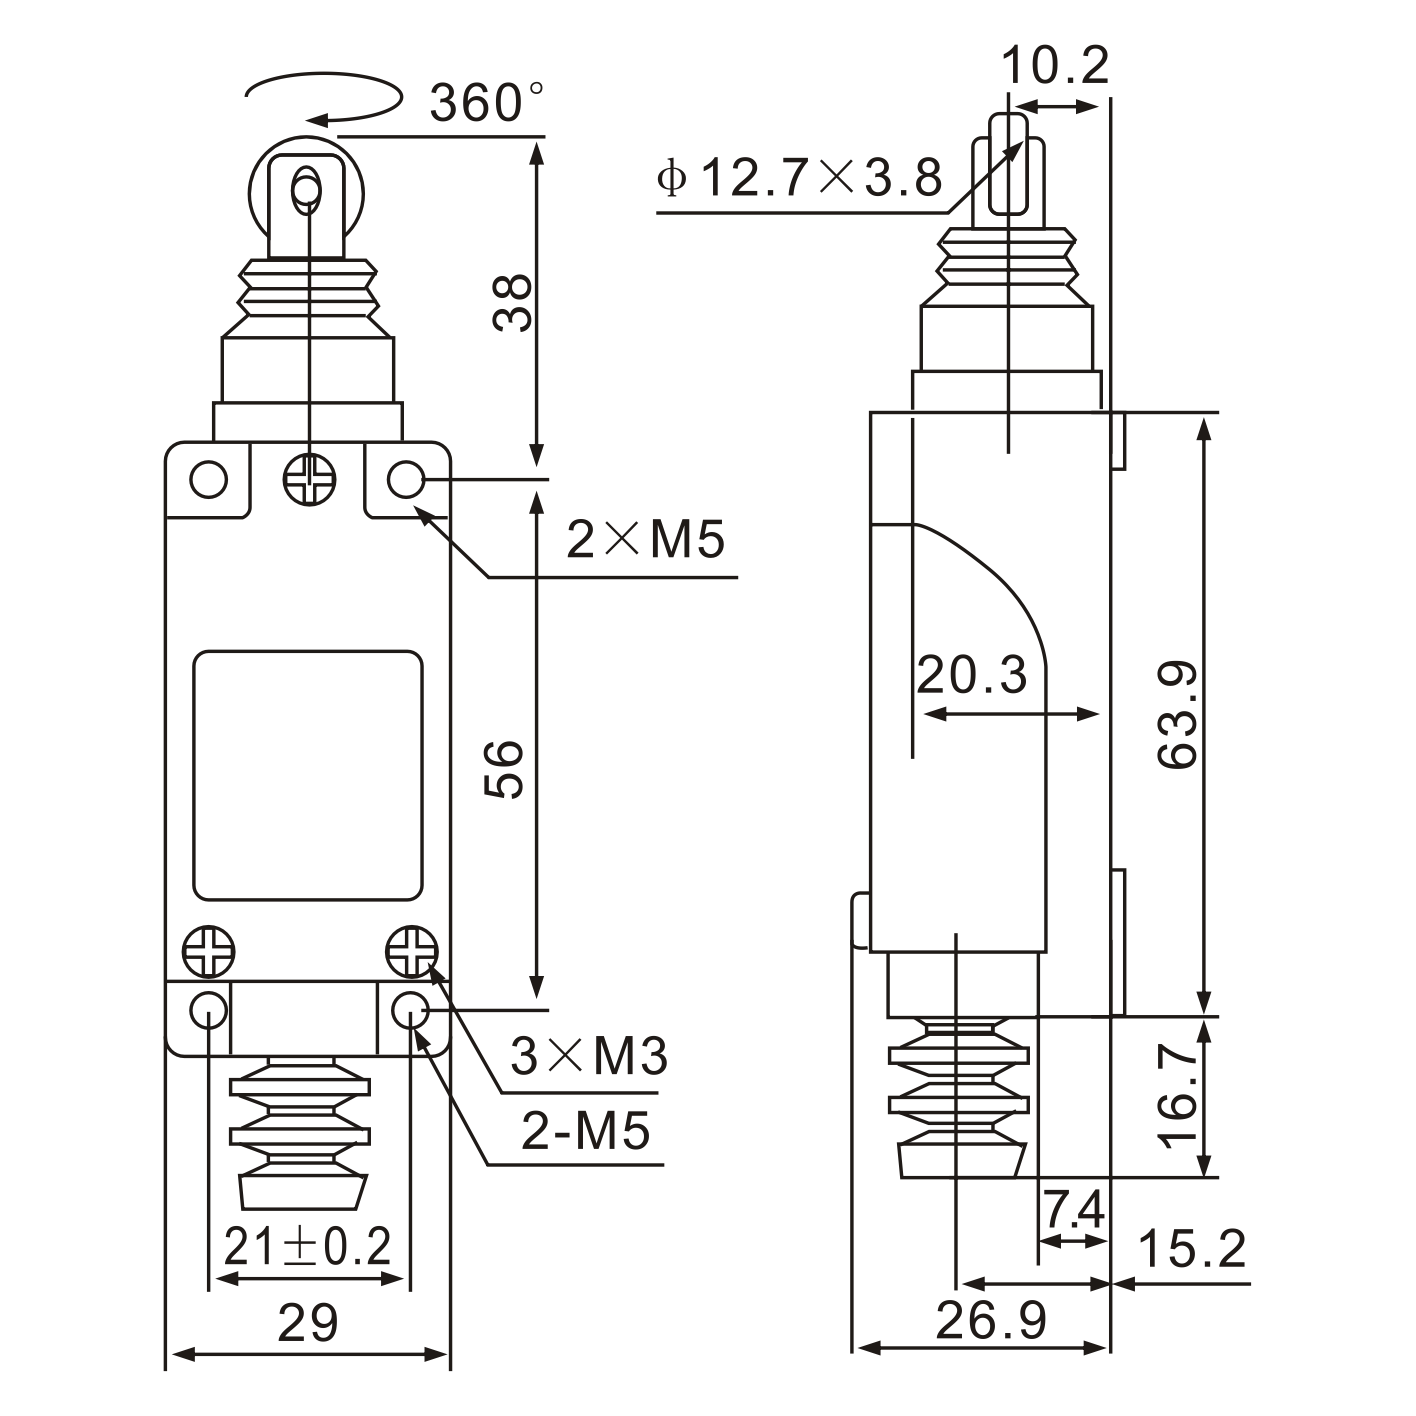 ME-8112 Cross Roller Plunger Momentary Limit Switch Diagram